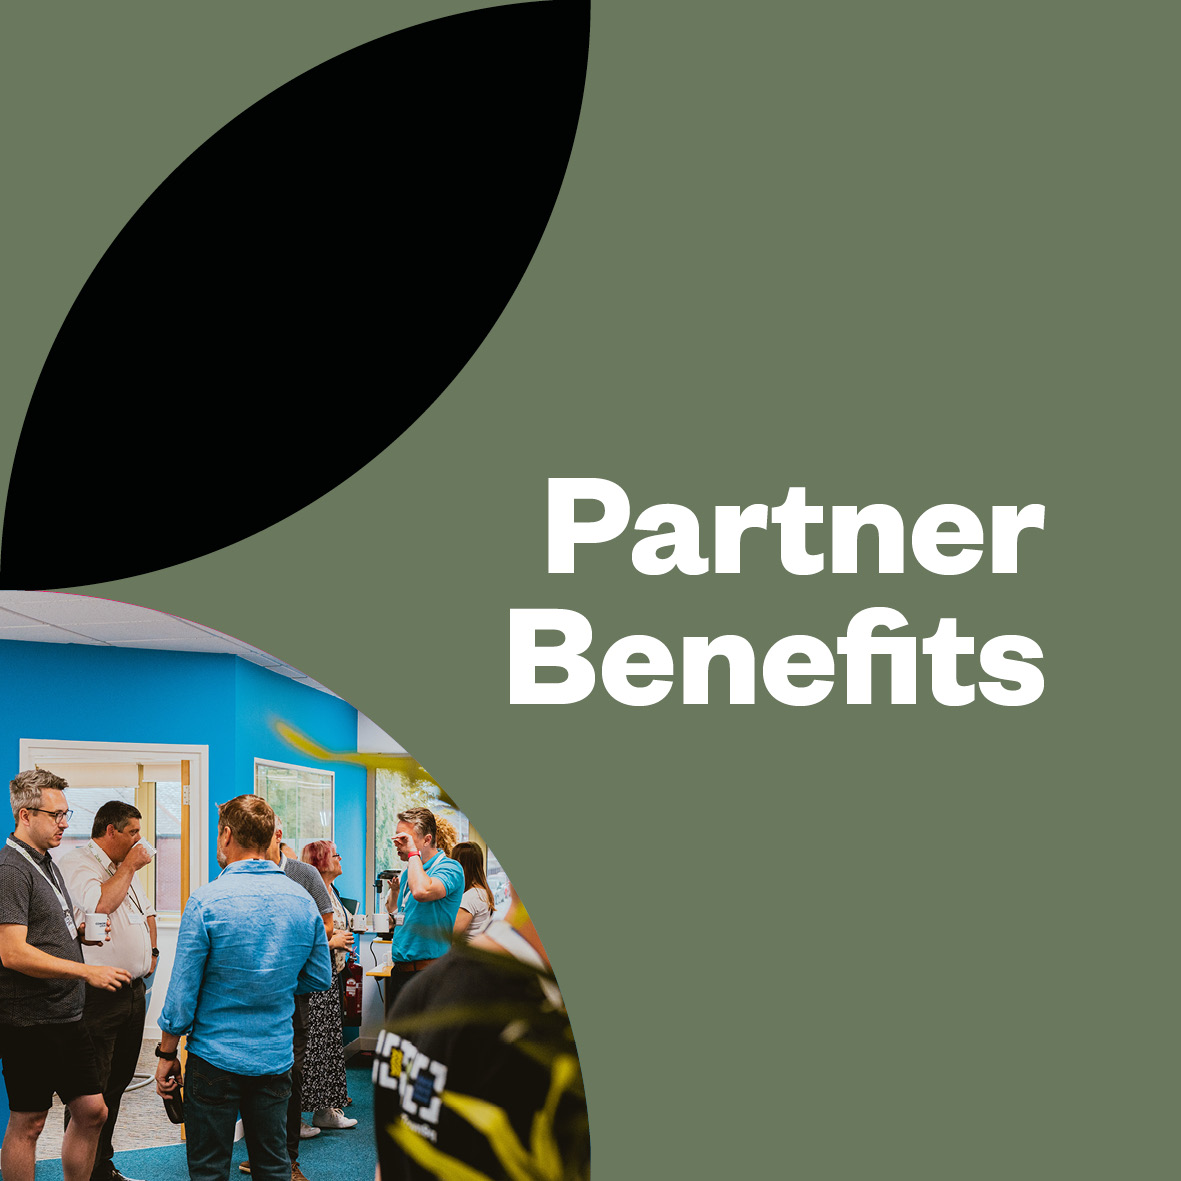 Did you know that with your membership, you get access to our partnership offers and discounts? We’ve teamed up with a variety of companies, ranging from skills and training to funding and tech - providing extras, offers on anything from a laptop to CRM systems and HR advice.